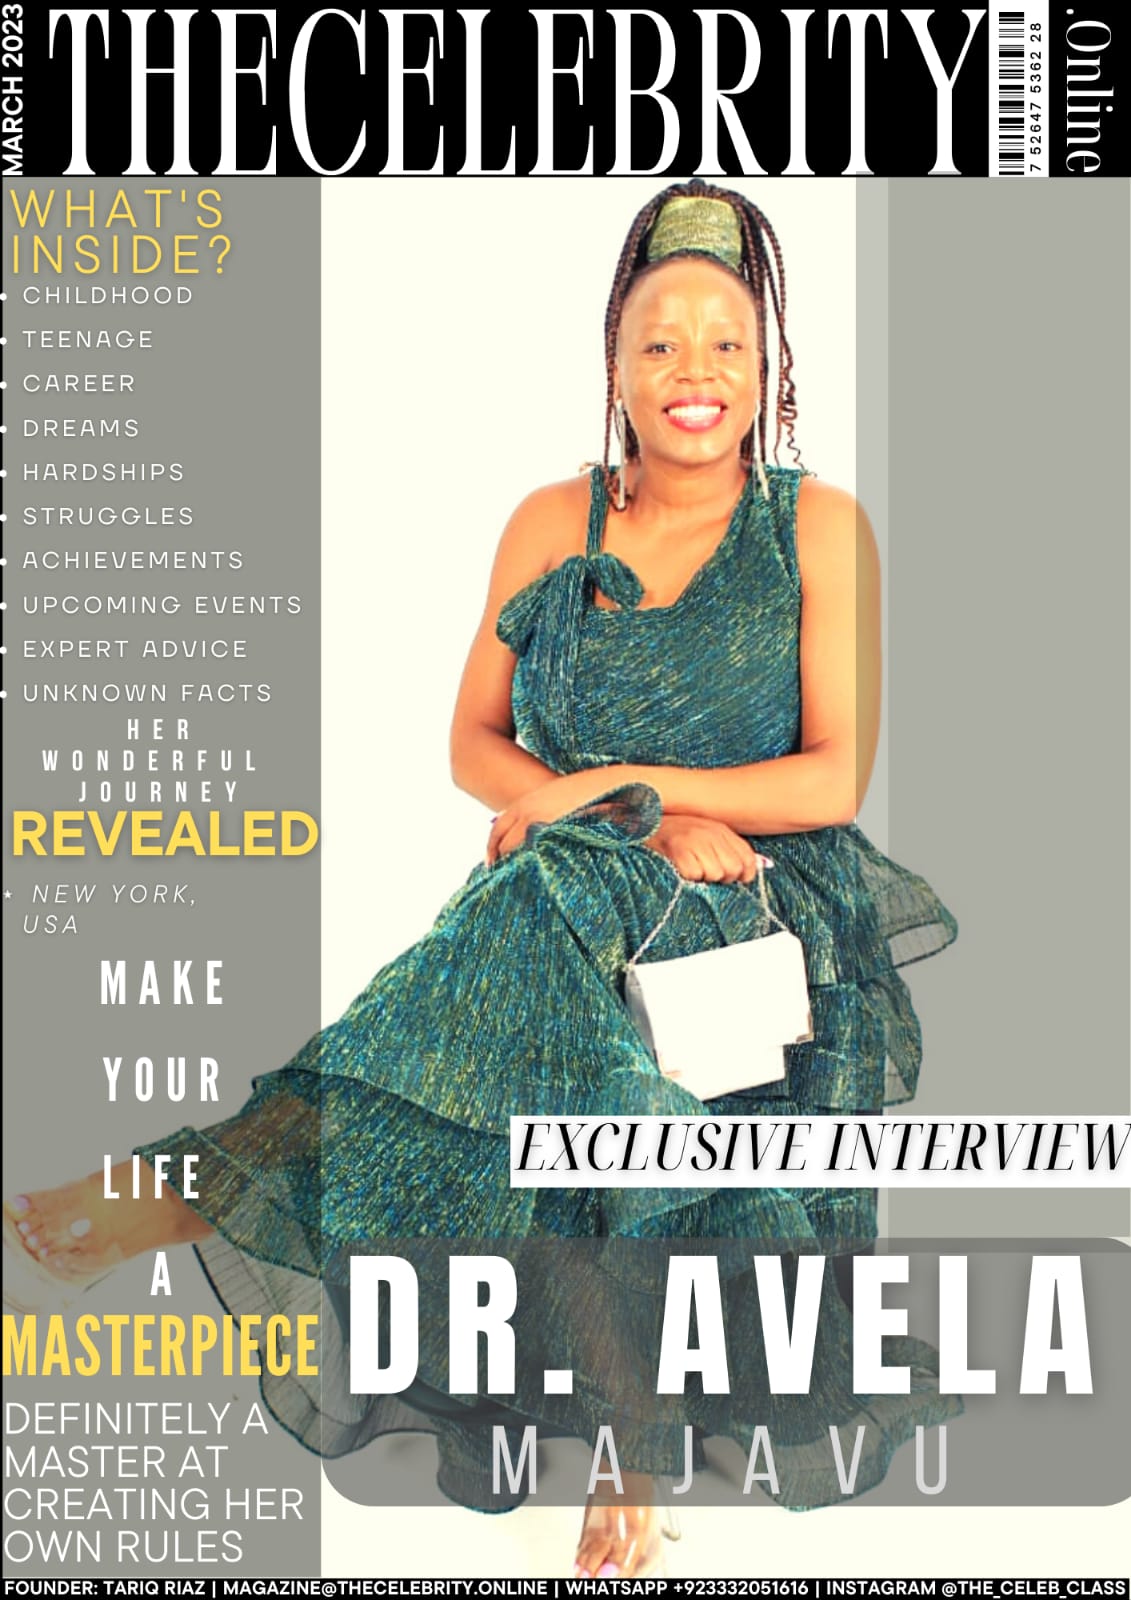 Dr. Avela Majavu Exclusive Interview – ‘Be hungry for help to better yourself’